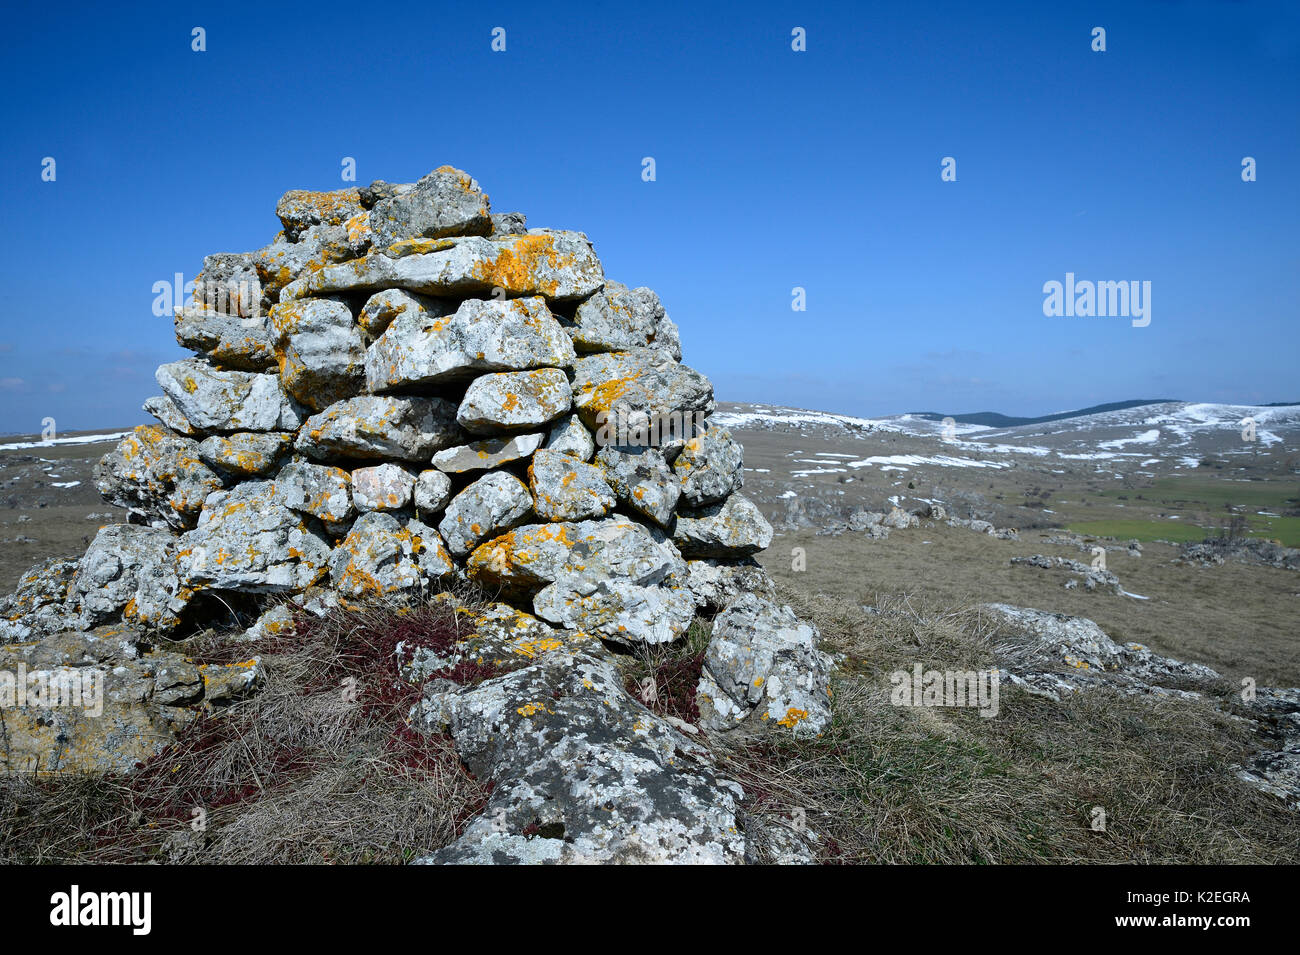 Stone cairn in upland landscape, Causse Mejean,  Cevennes National Park, France, March. Stock Photo